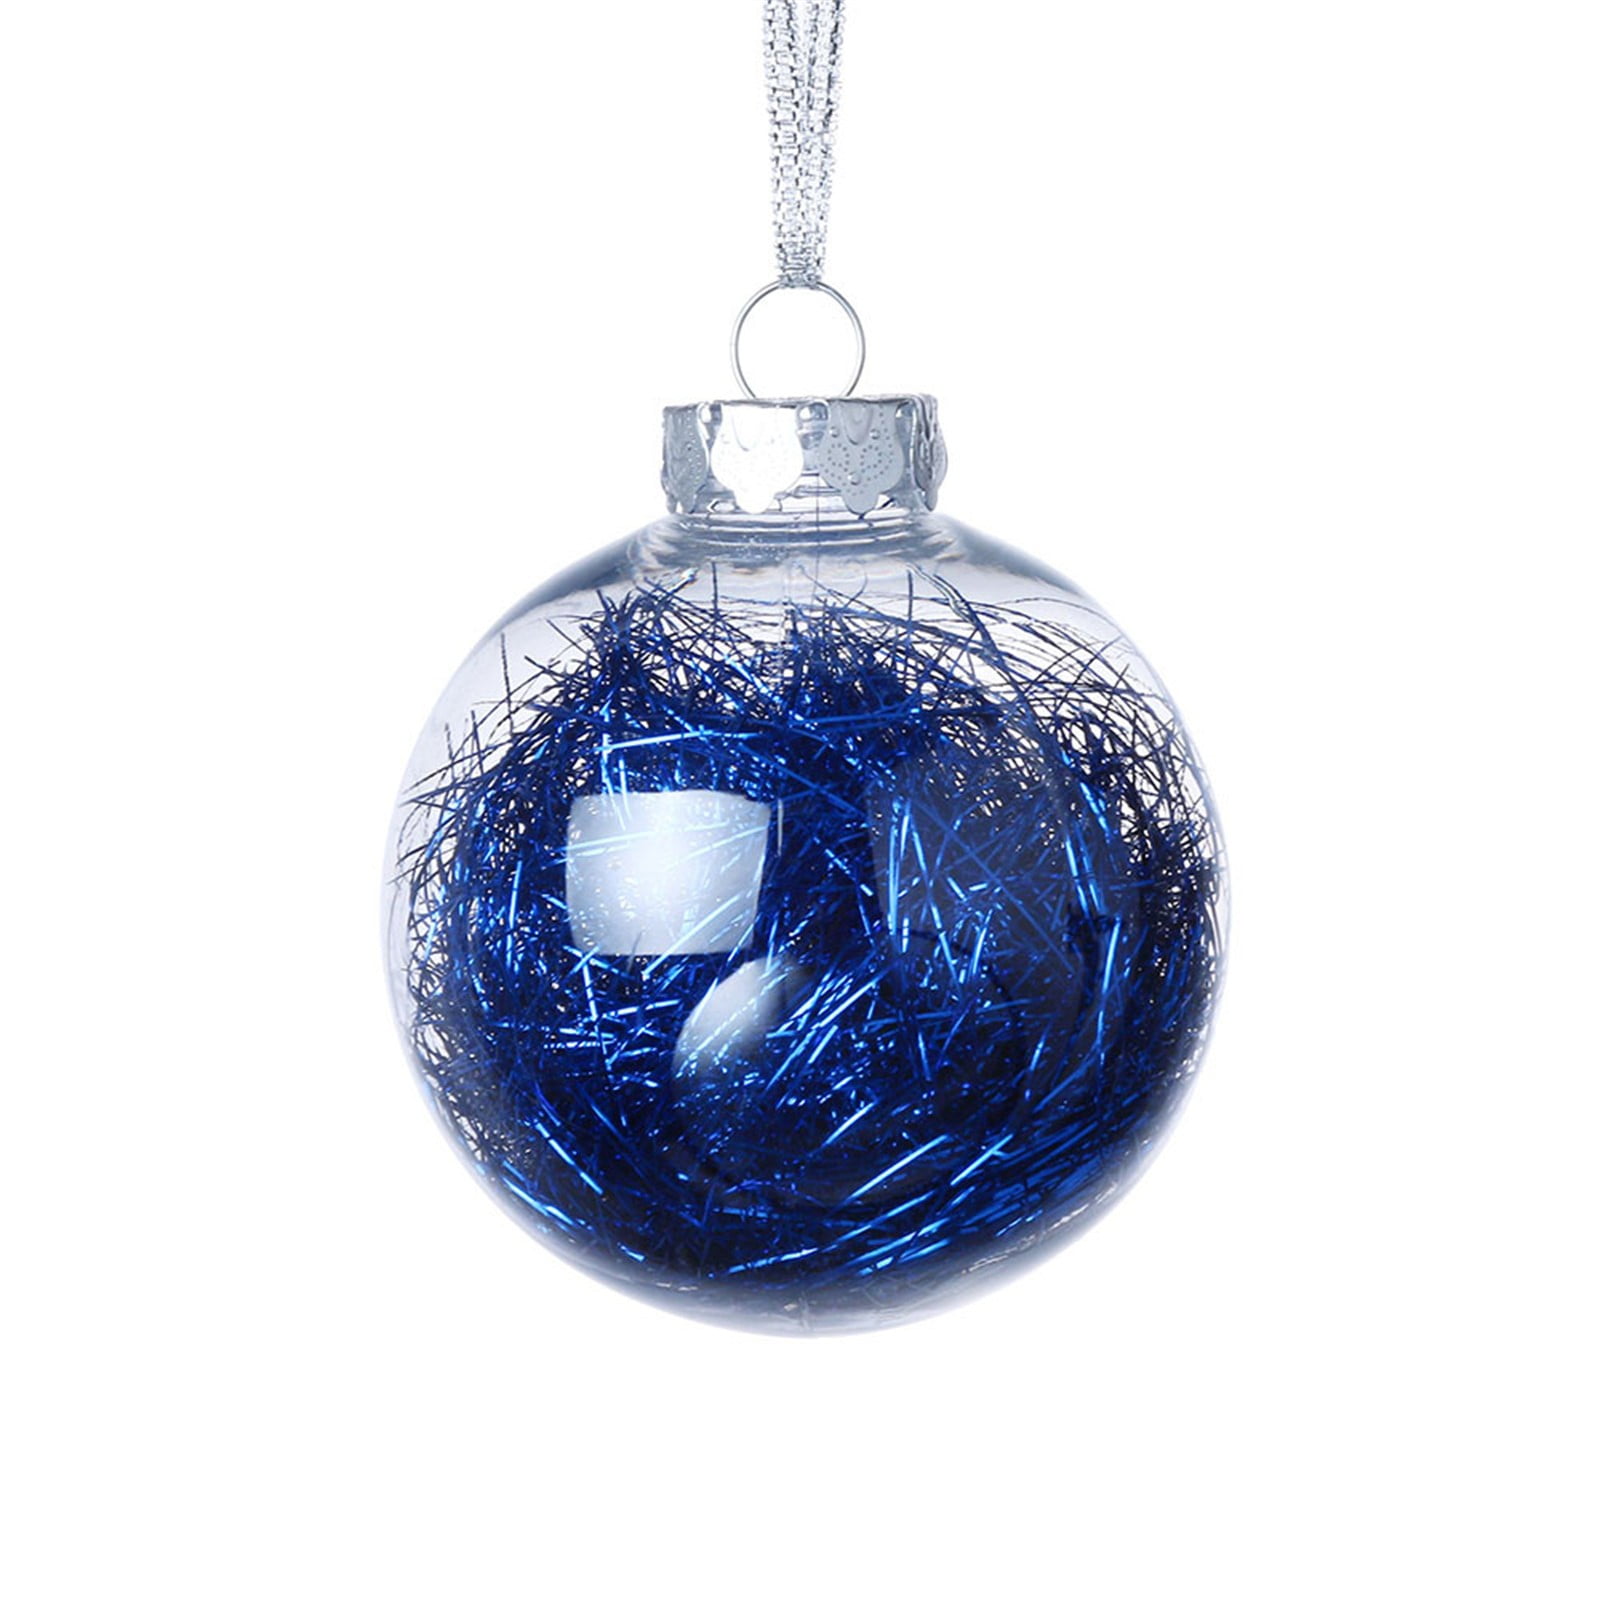 Details about   Christmas Pendant Ornaments Hanging Gifts Christmas Tree Ornament Decorat LZ 